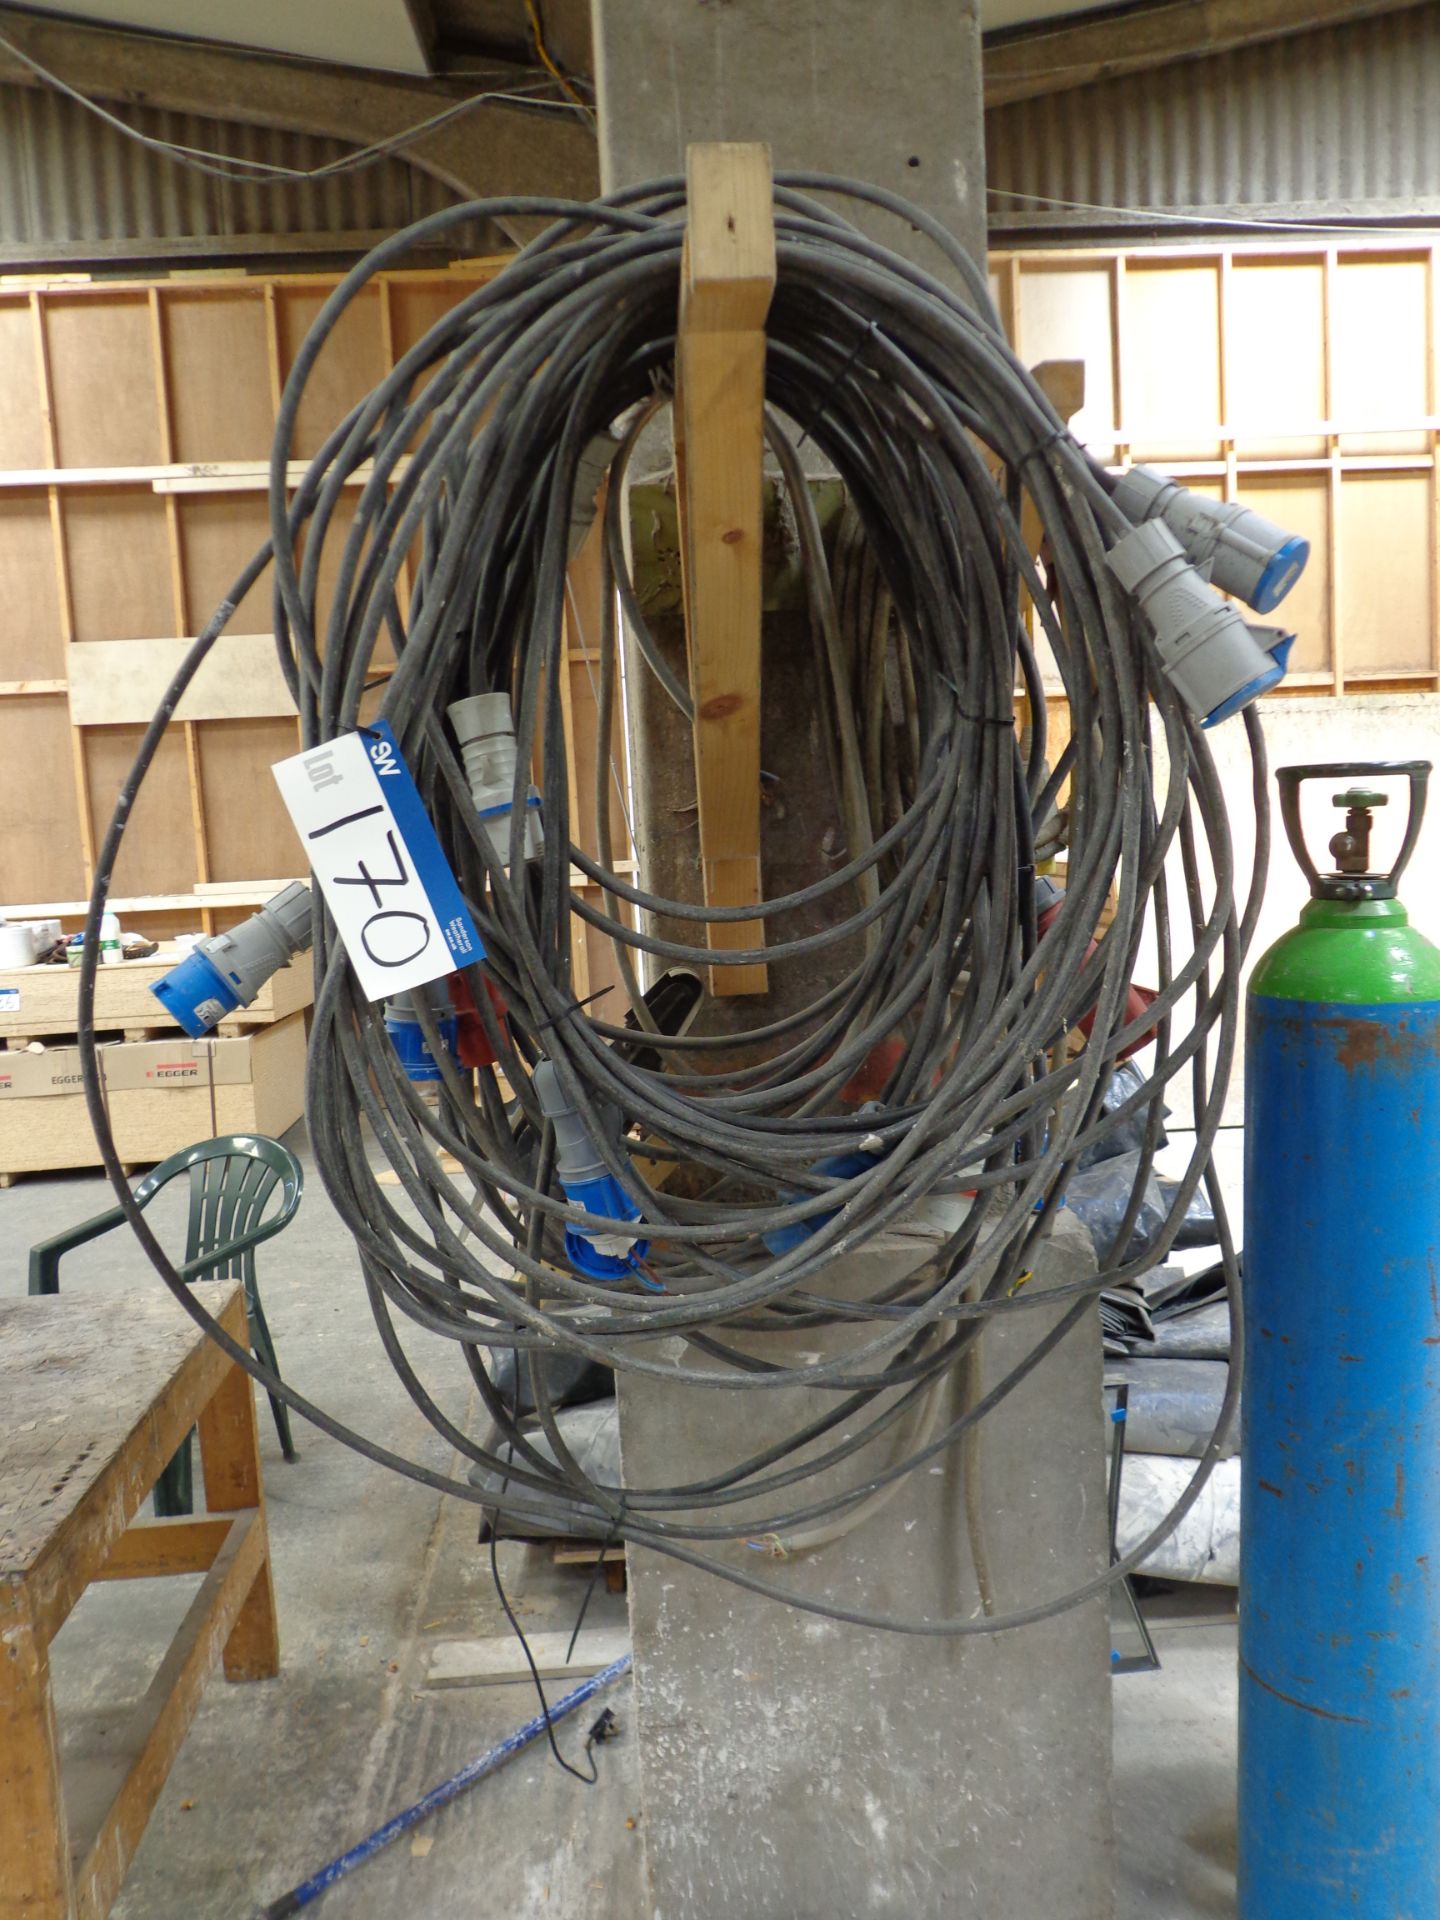 Two 415V Extension Cables